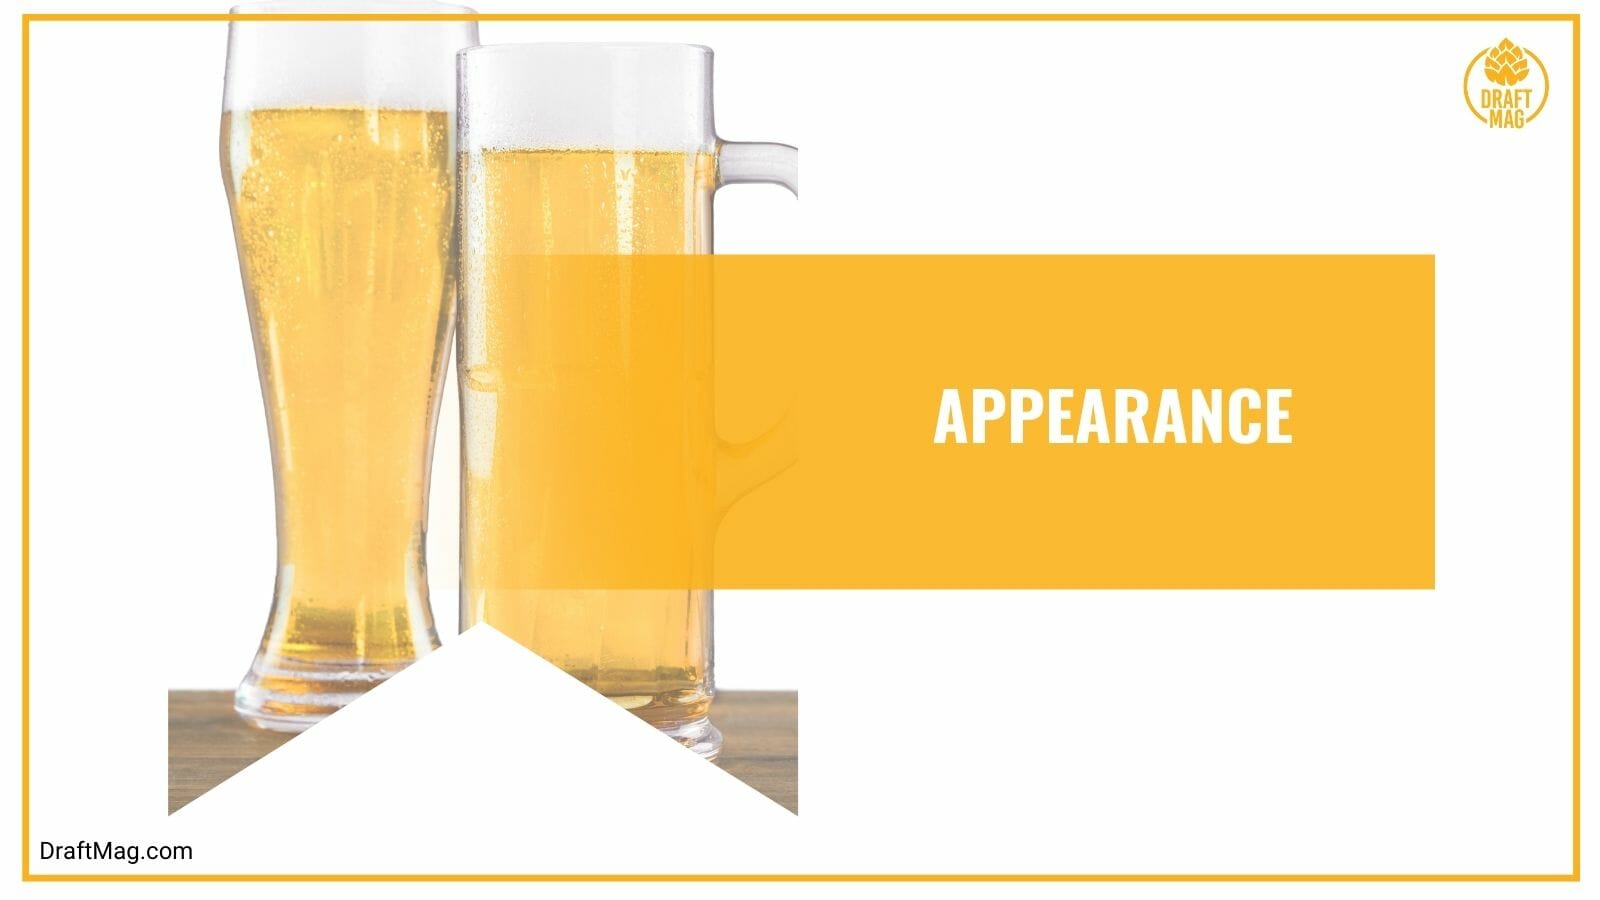 Appearance of Michelob Golden Light